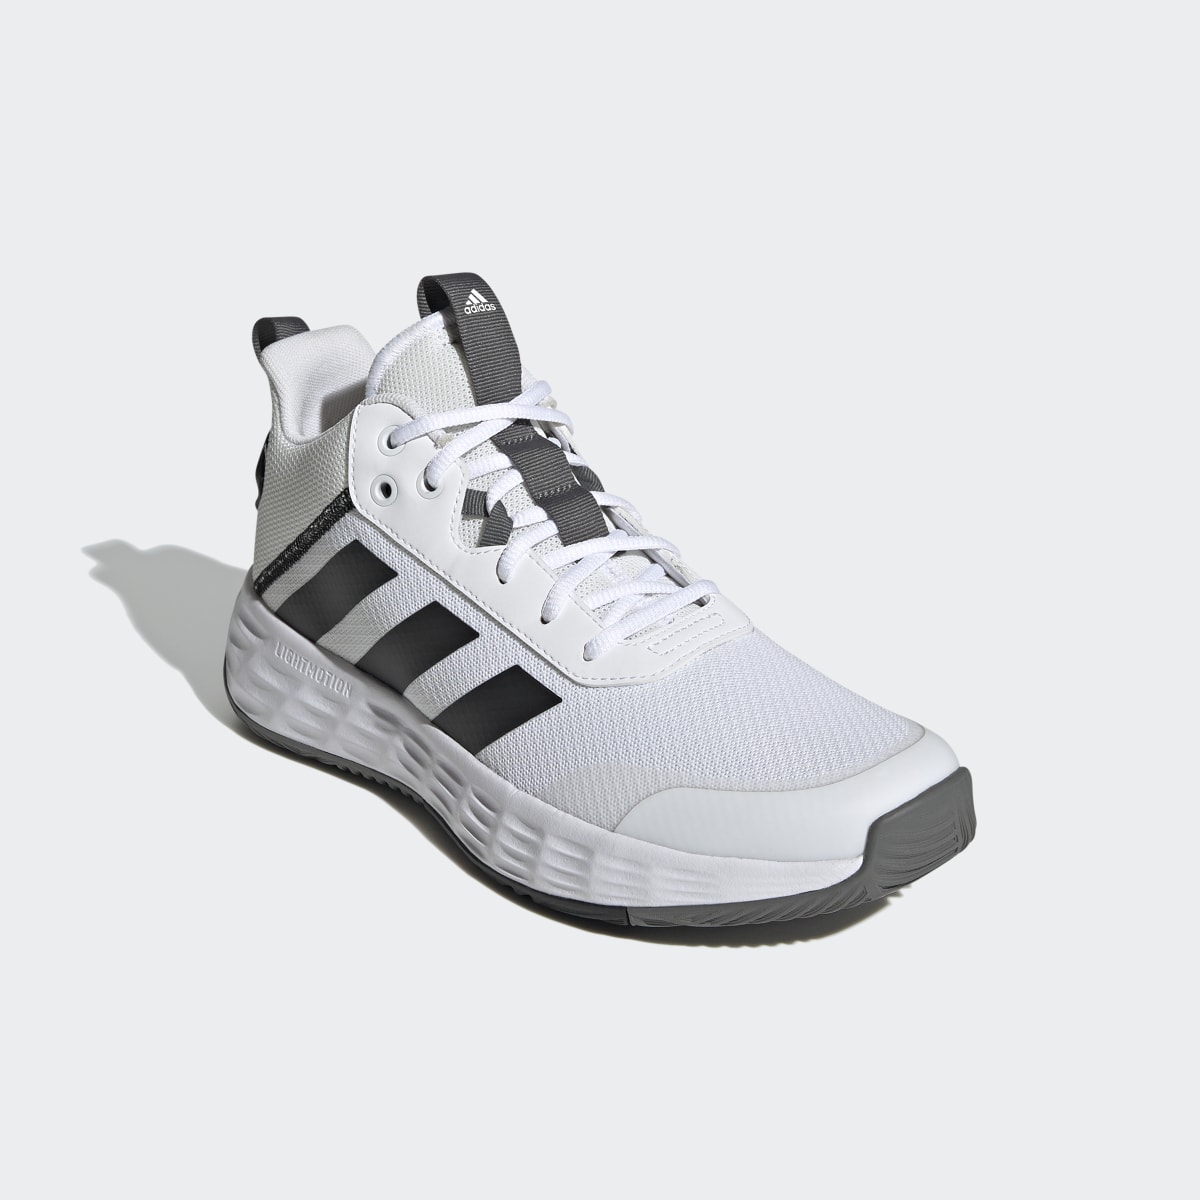 Adidas Ownthegame Shoes. 5